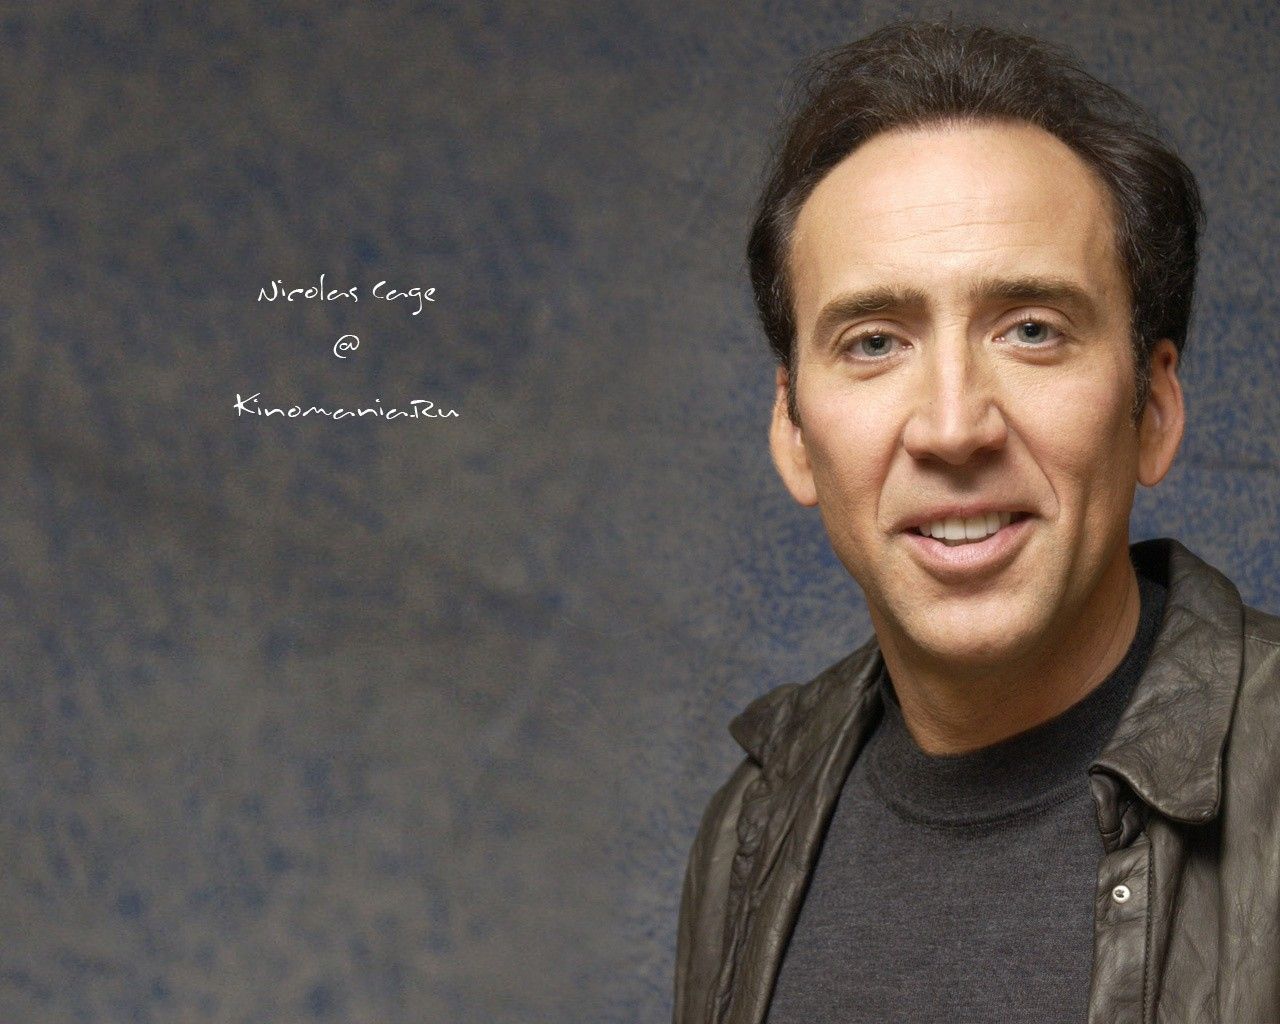 Actor Nicolas Cage wallpapers and images - wallpapers, pictures